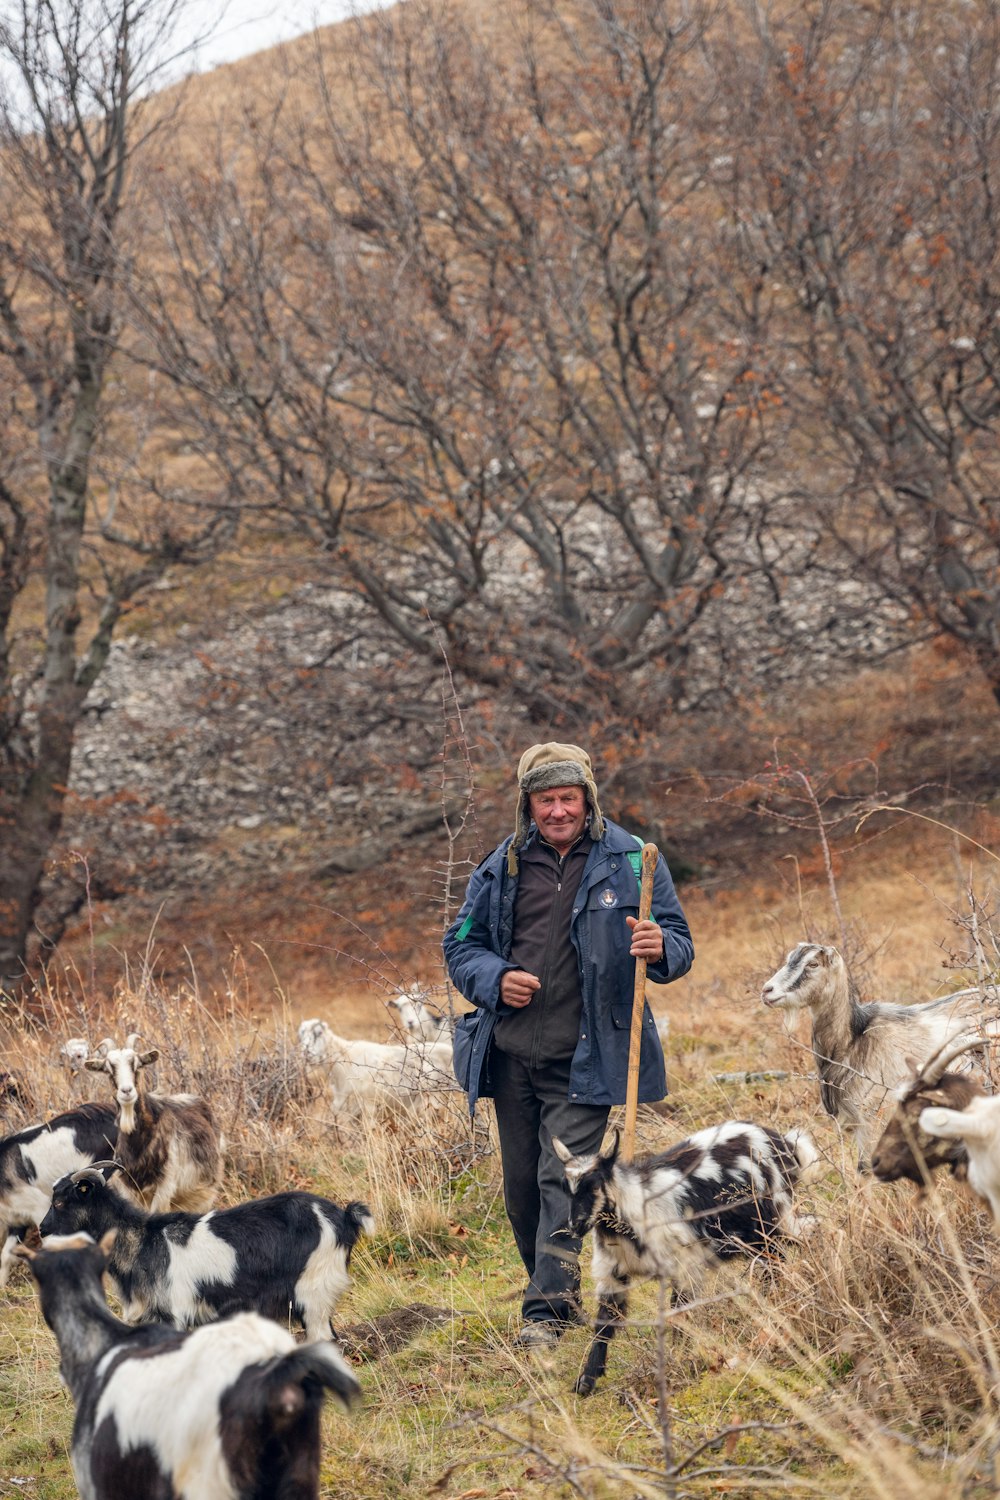 a man walking through a field with lots of cows